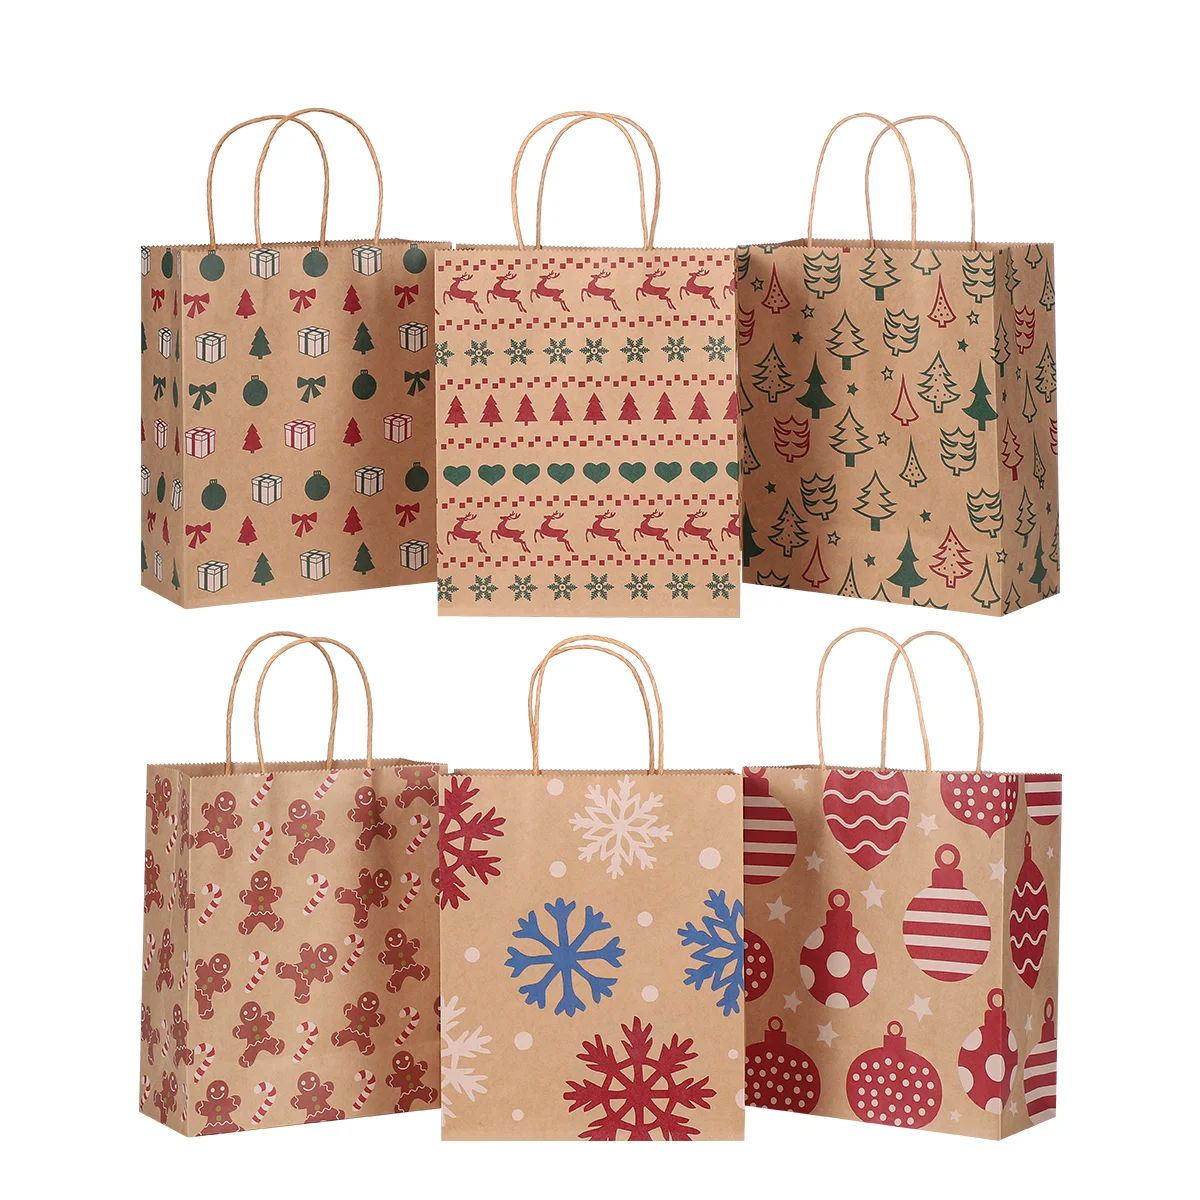 

24pcs Christmas Kraft Bags 6 Patterns Xmas Gift Bags Paper Storage Christmas Paper Bags for Festival Holiday Banquet